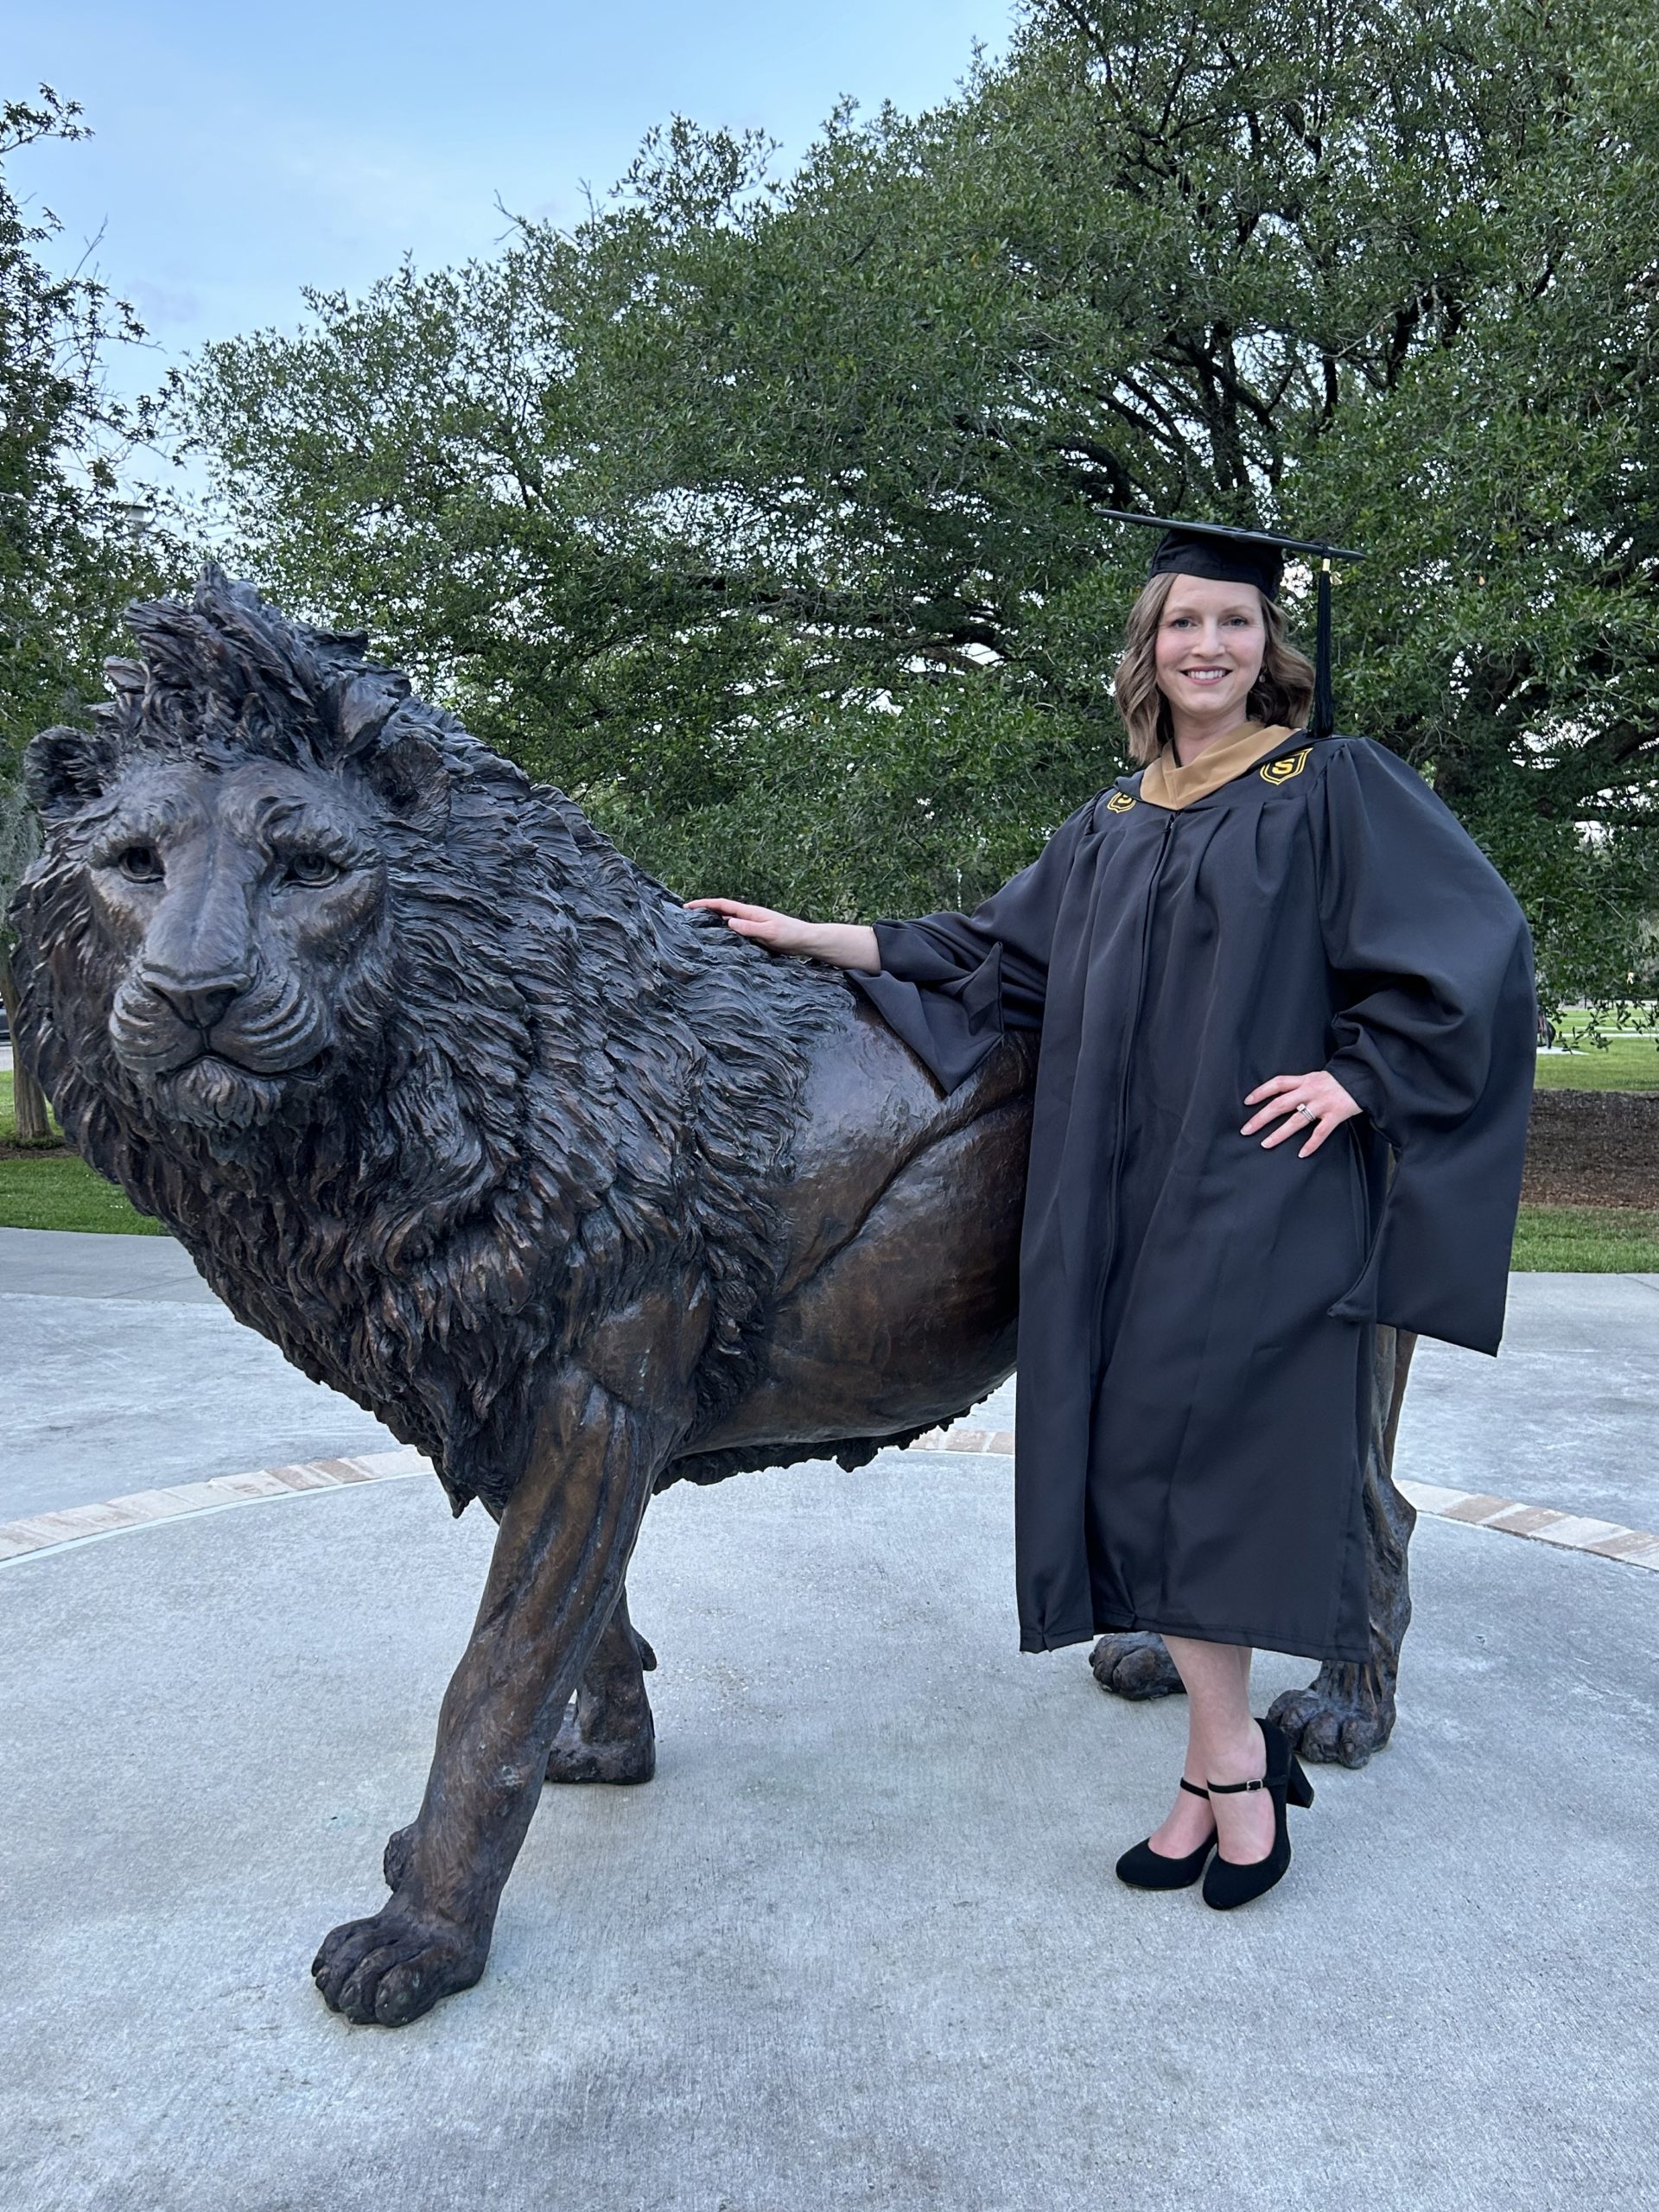 H/S Office Manager, Brittany Olivier, MBA Earns Her Master’s Degree